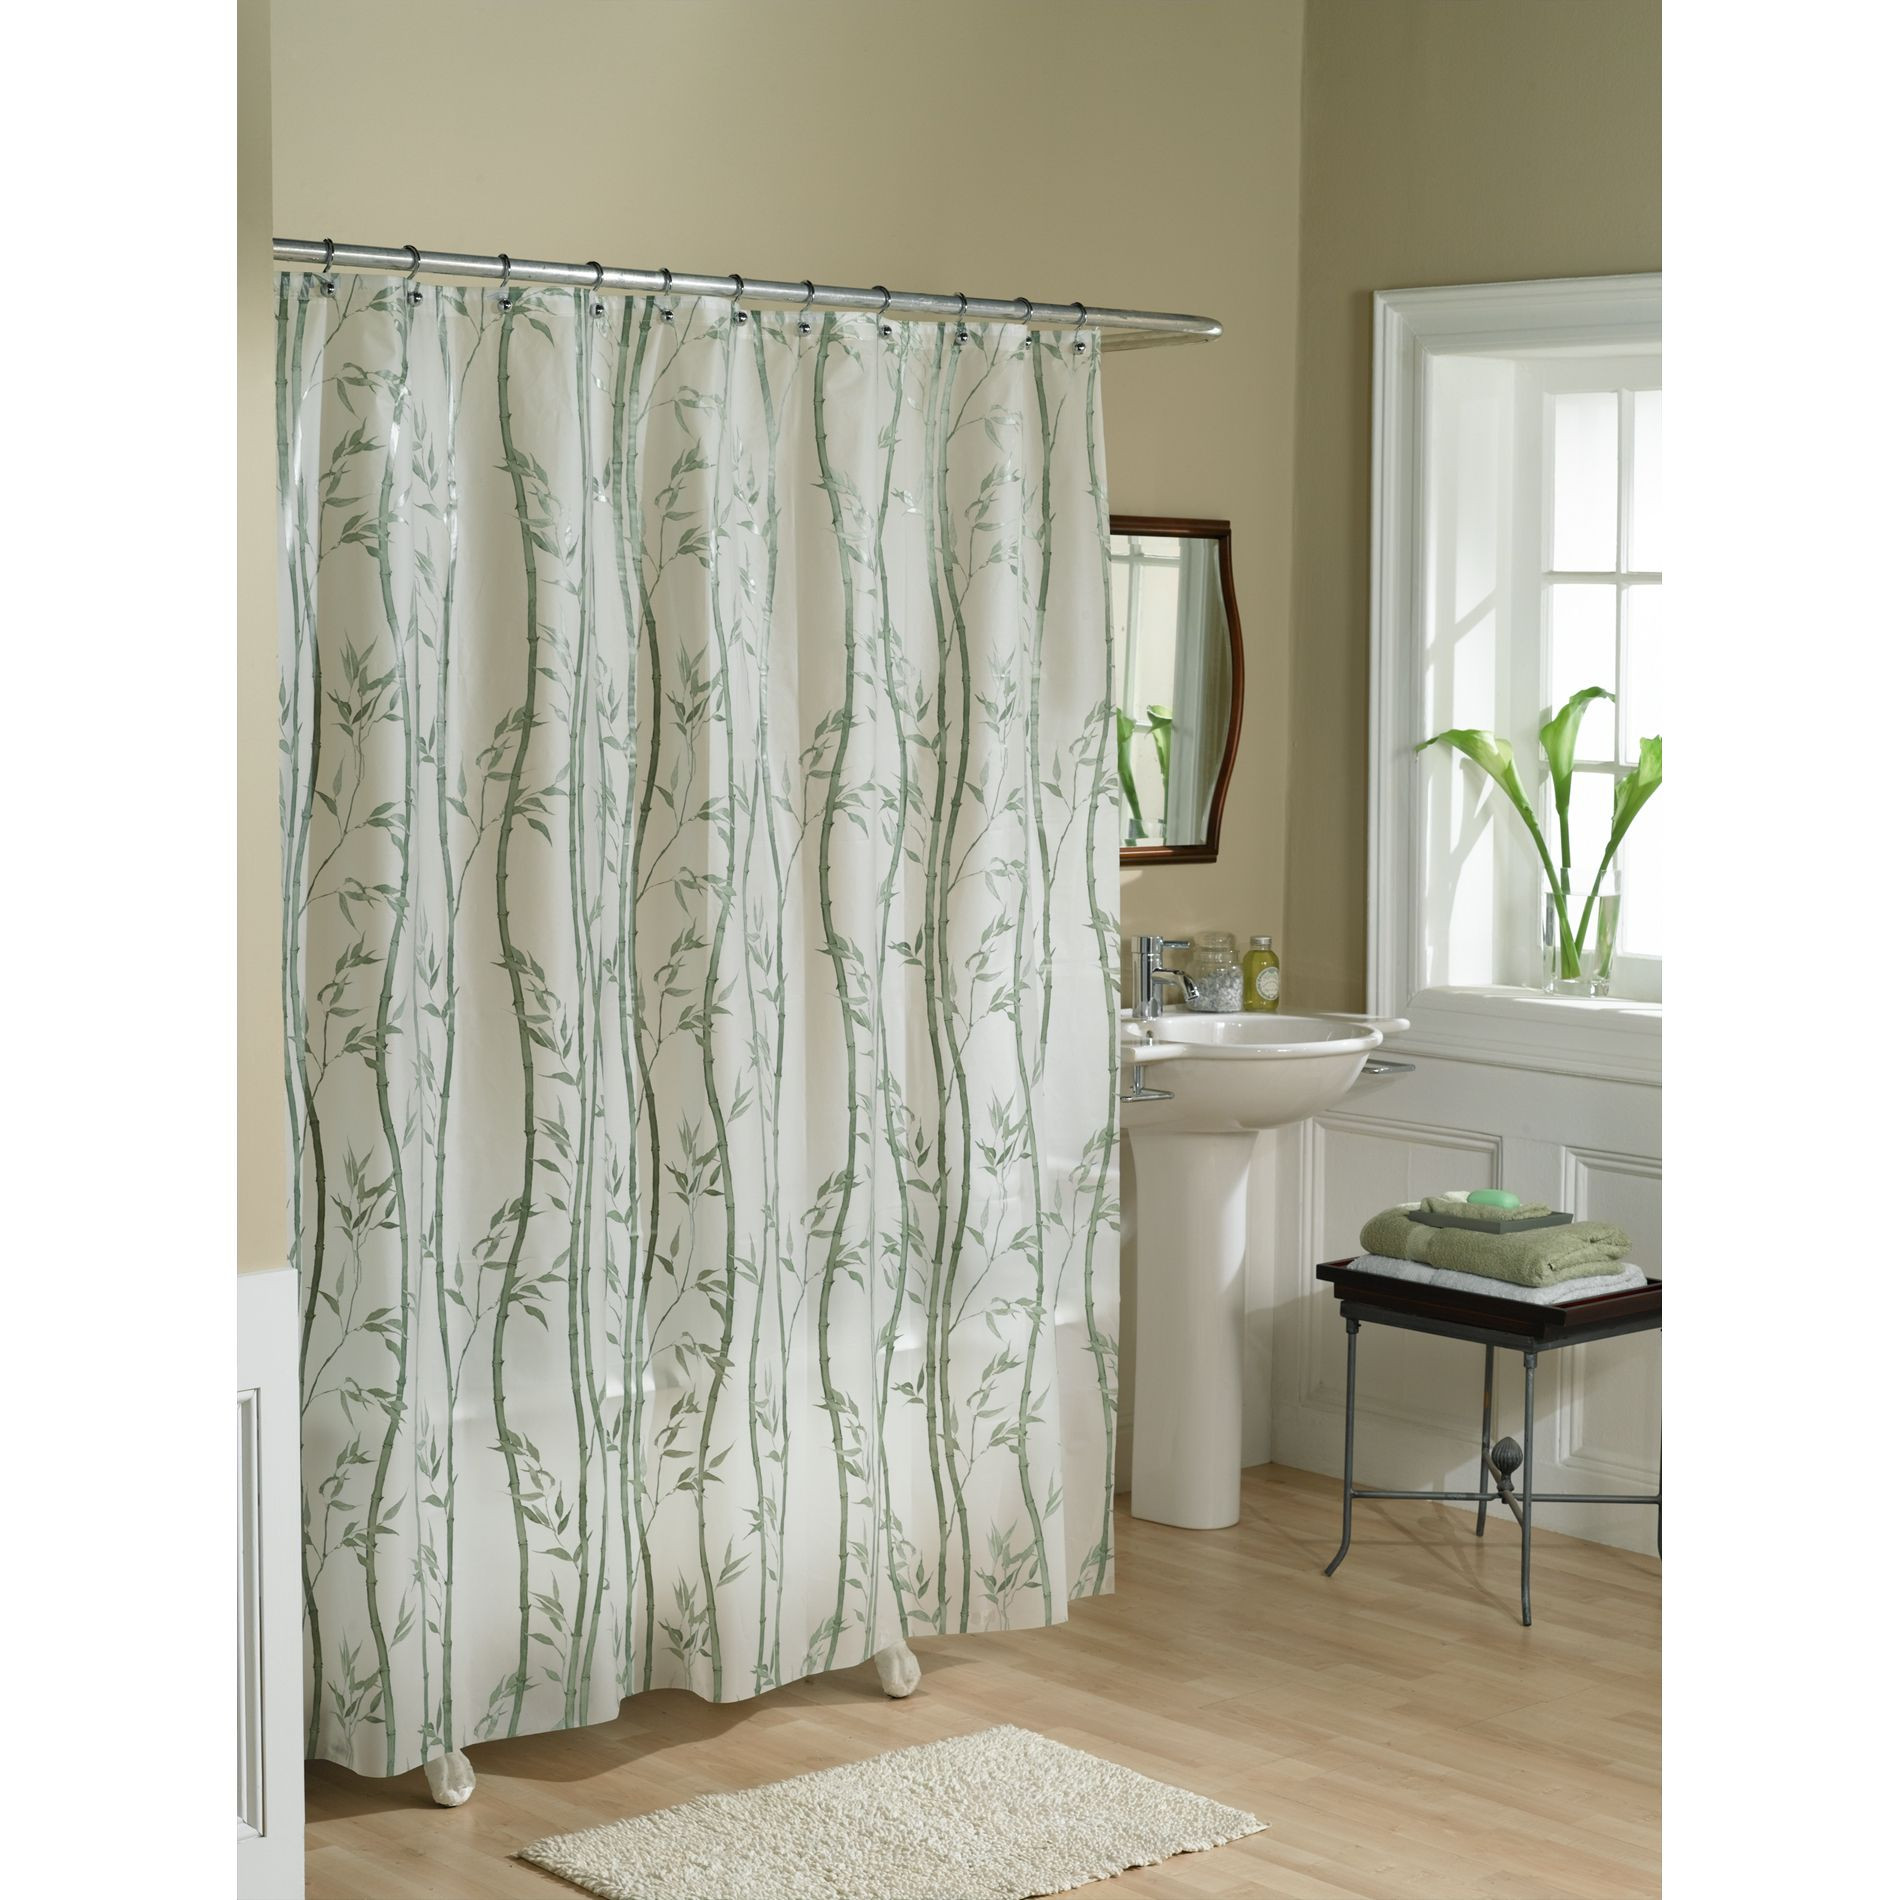 Bathroom Sets With Shower Curtain
 Essential Home Shower Curtain Bamboo Vinyl PEVA Home